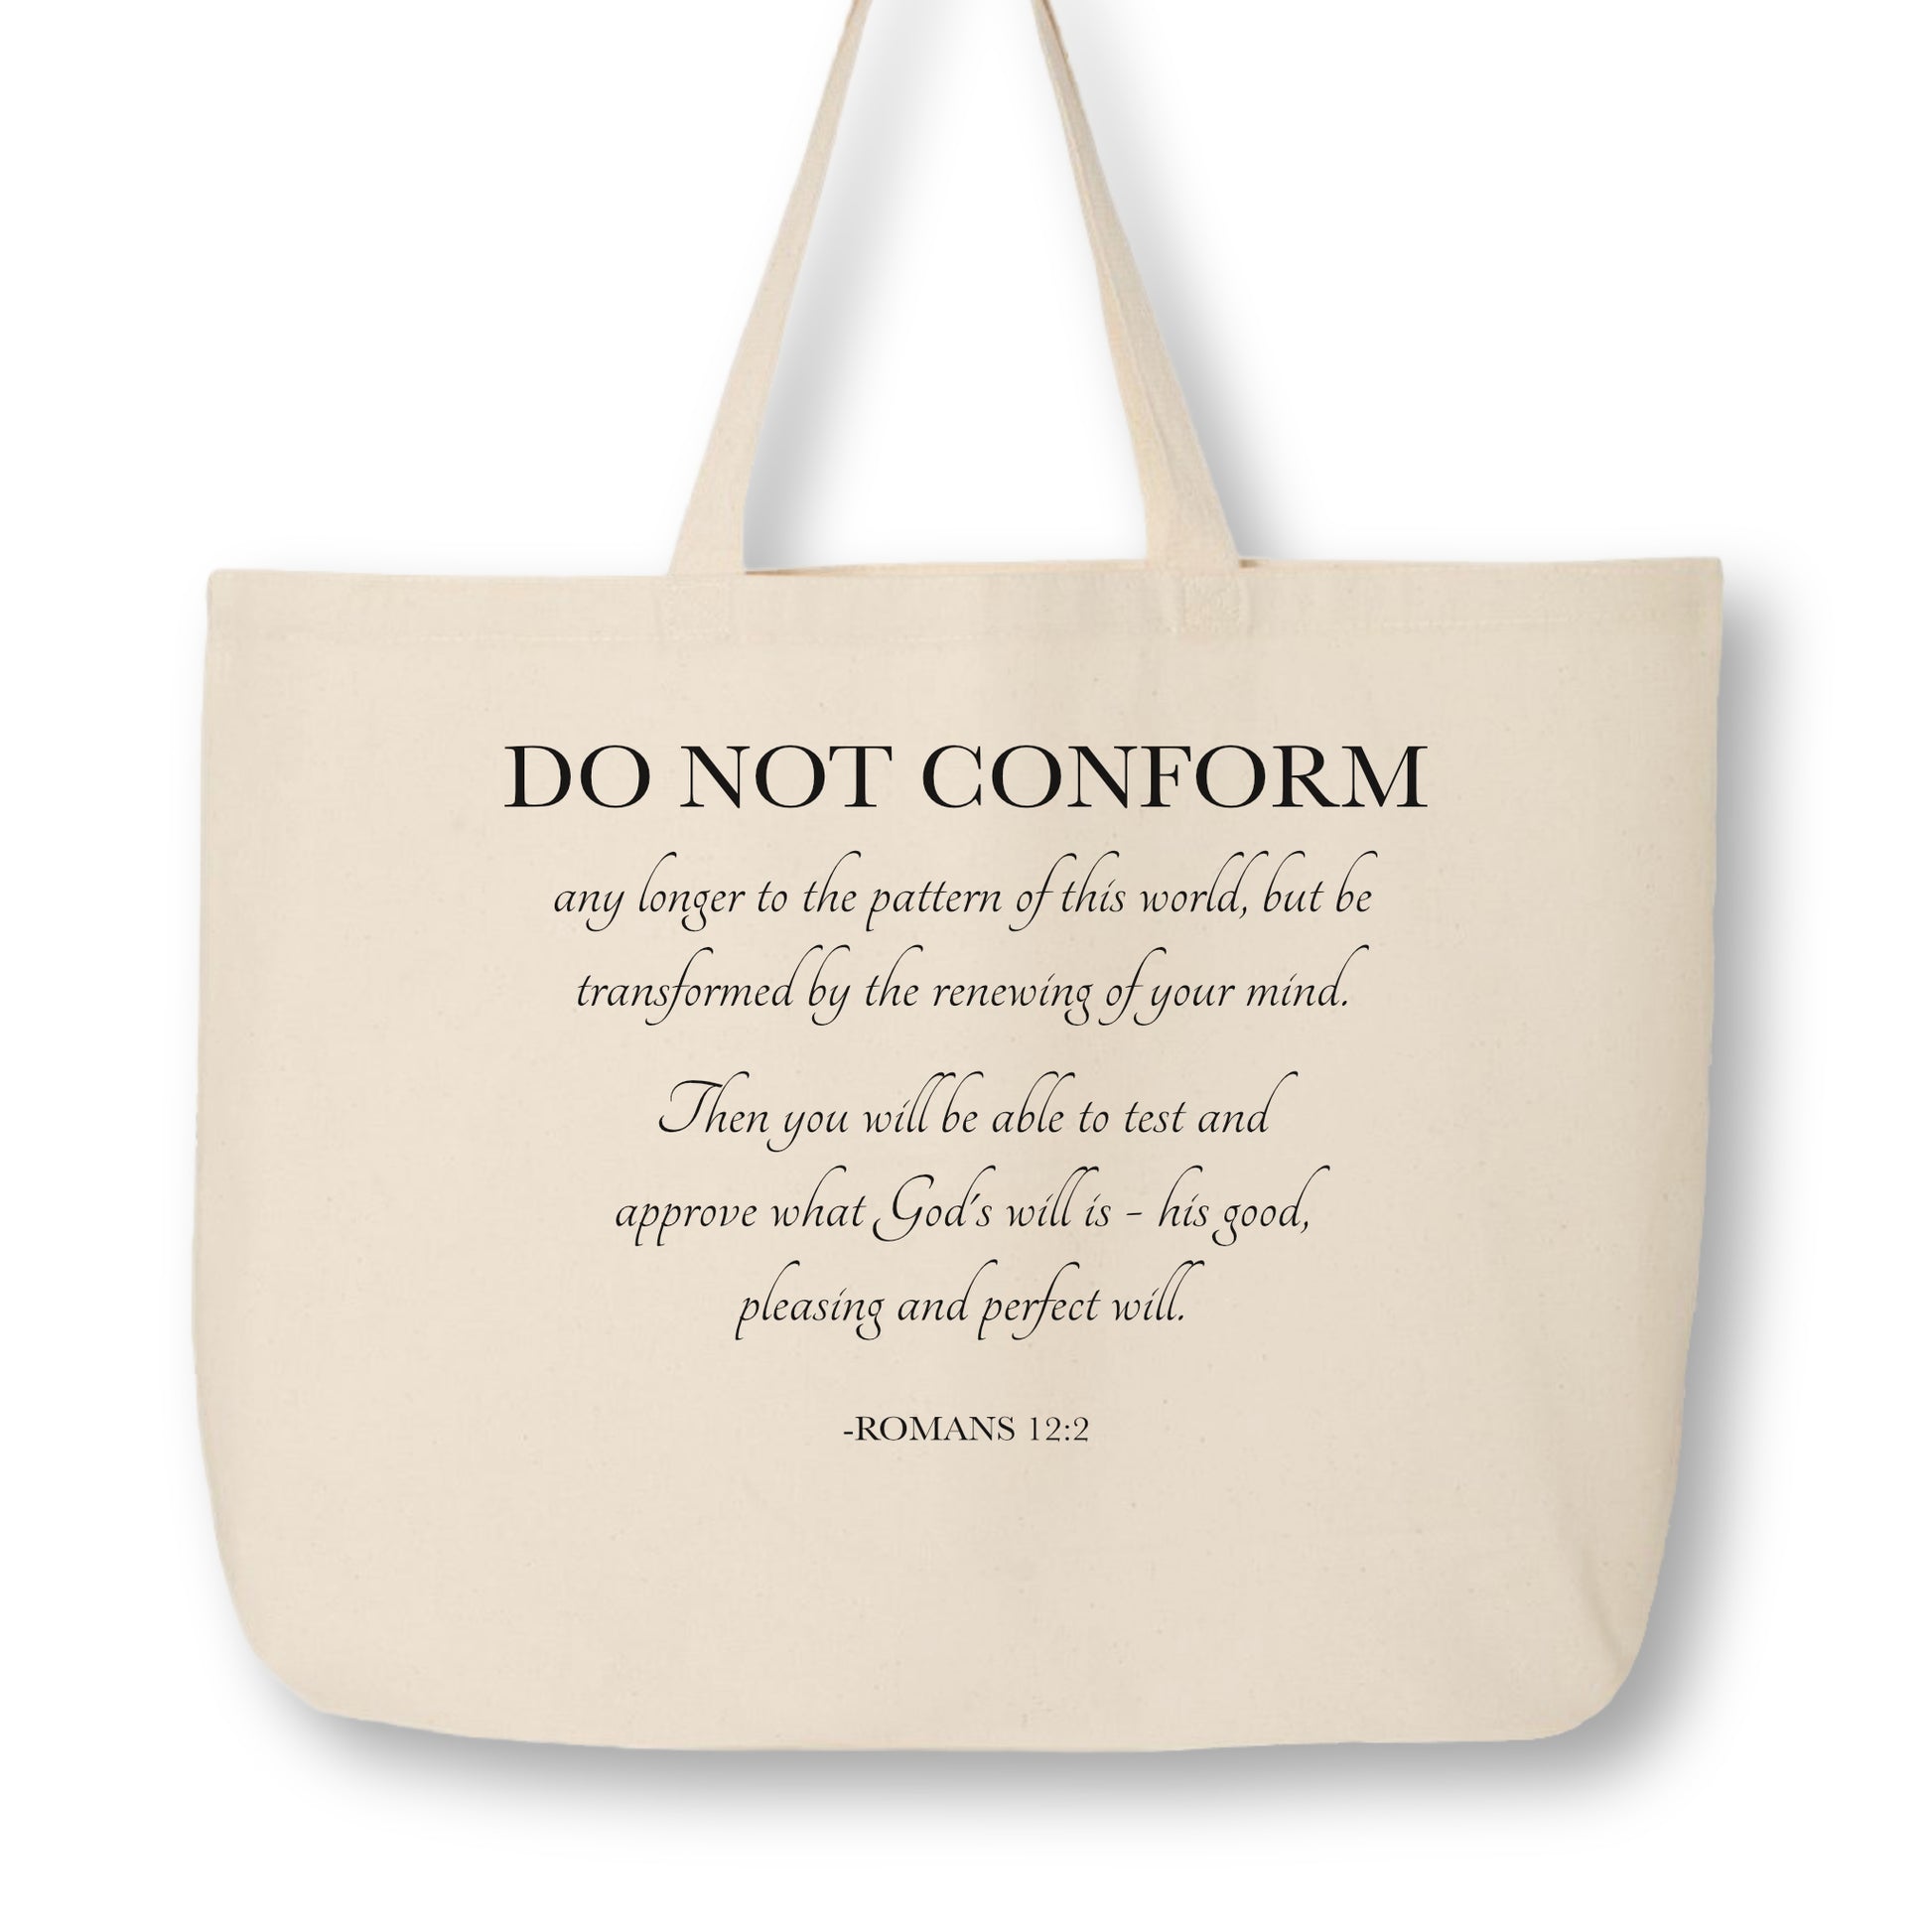 Do not conform any longer to the pattern of this world, but be transformed by the reviewing of your mind.  Then you will be able to test and approve what God's will is - his goo, pleasing and perfect will.  - Romans 12:2, Canvas Tote Bag